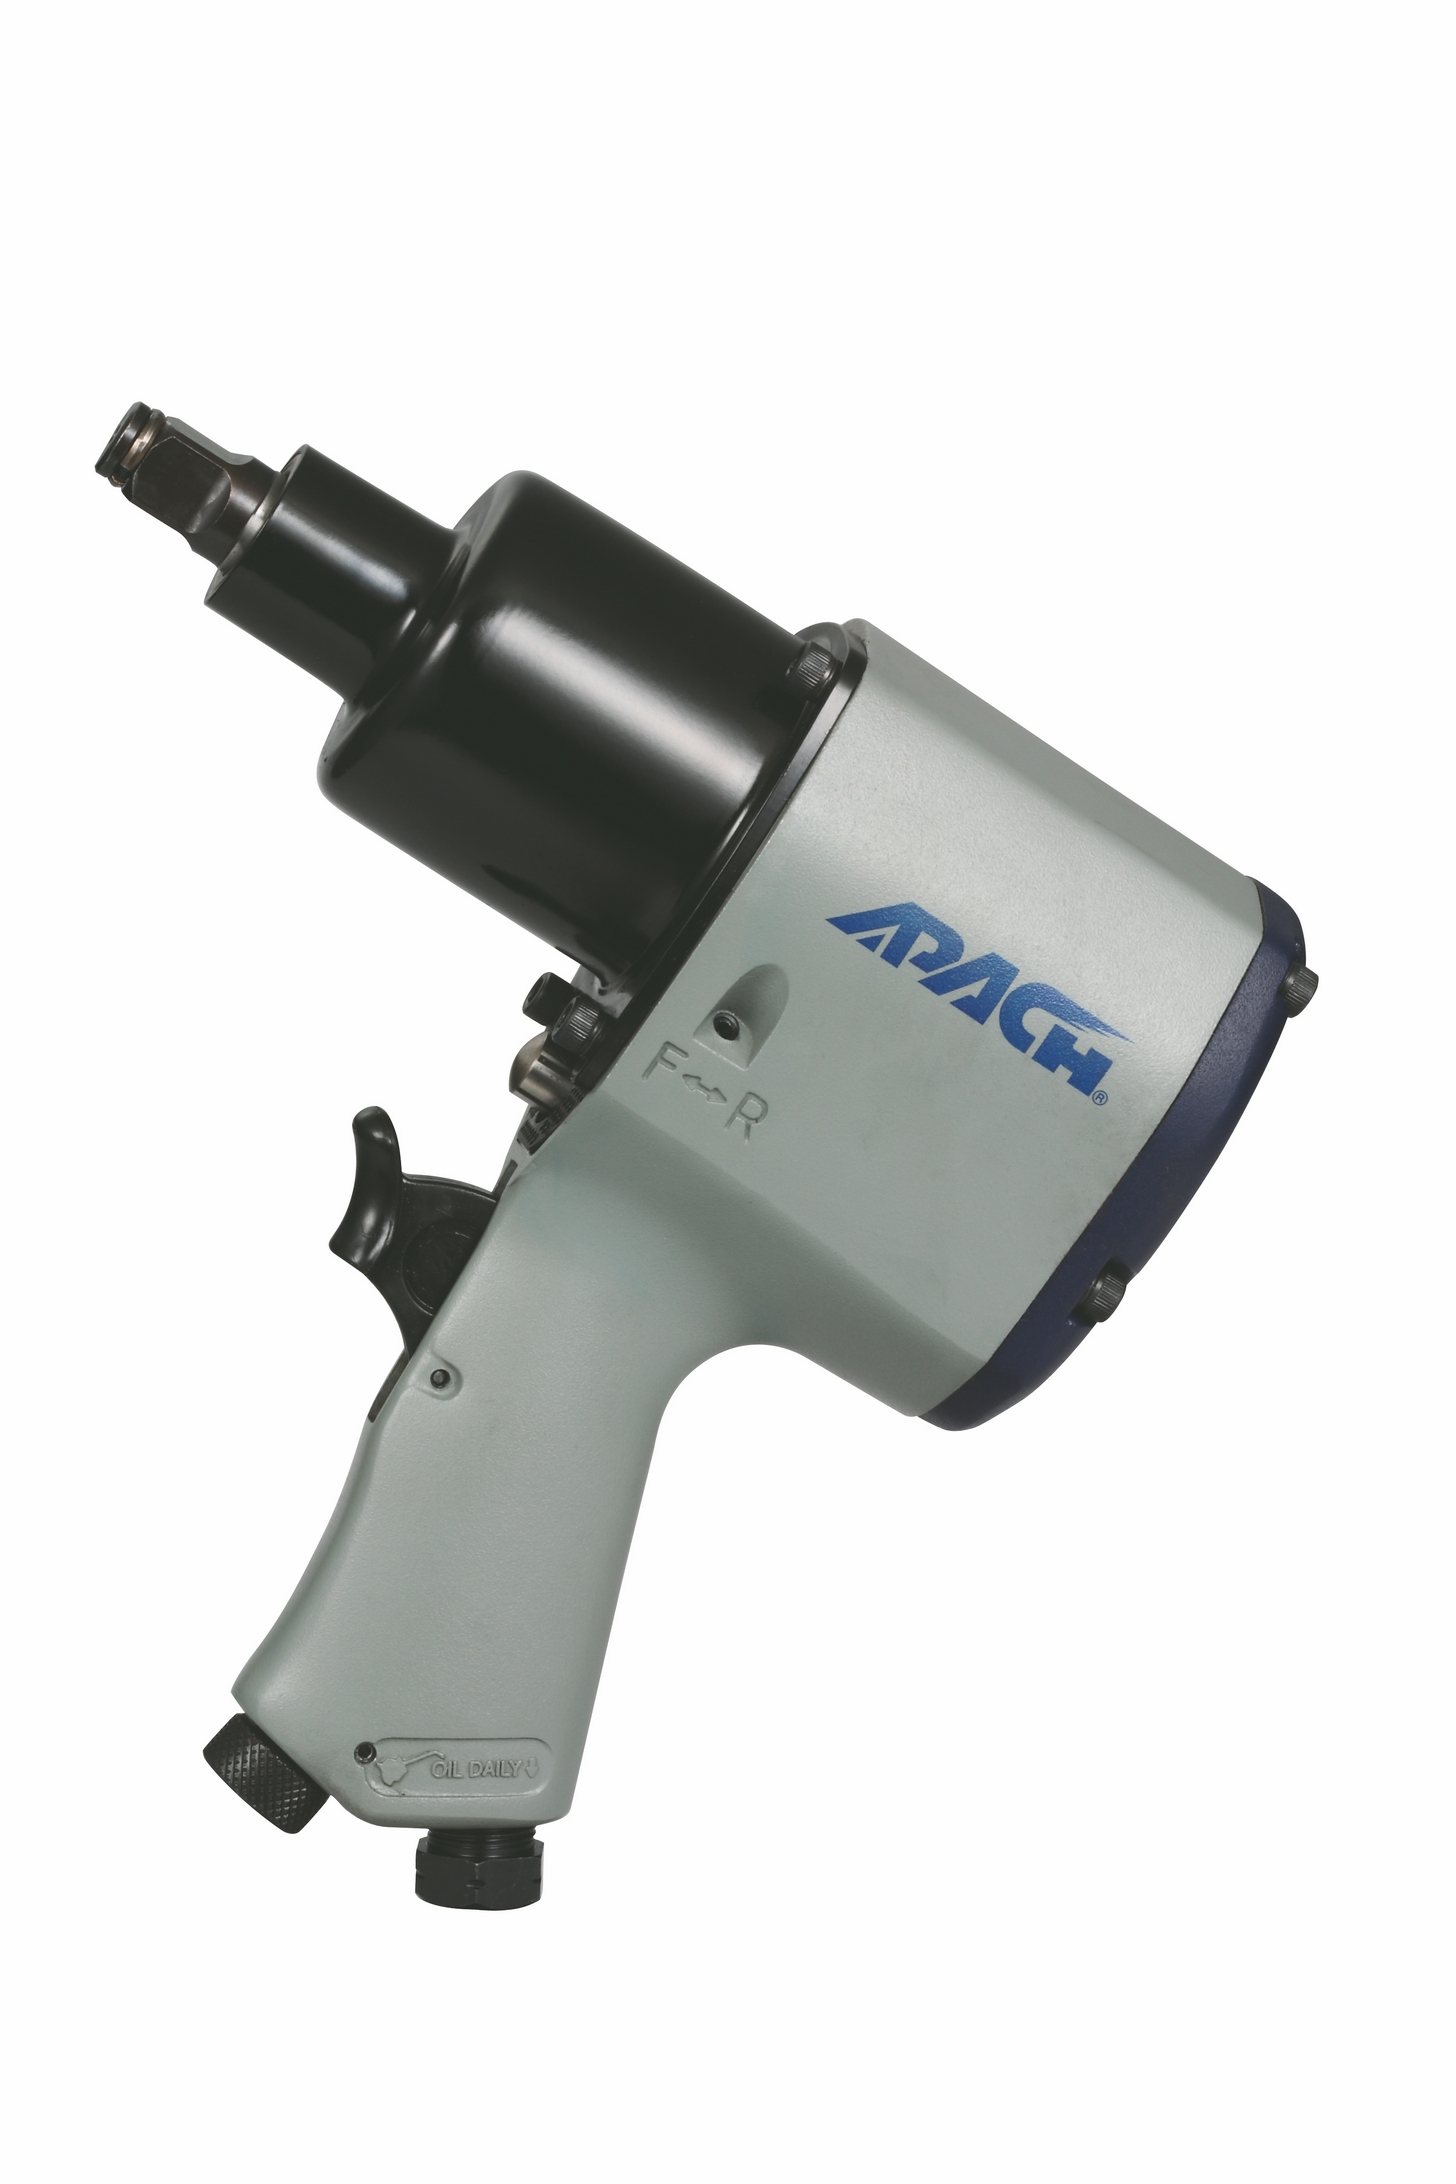 AW040C 1／2" Air Impact Wrench